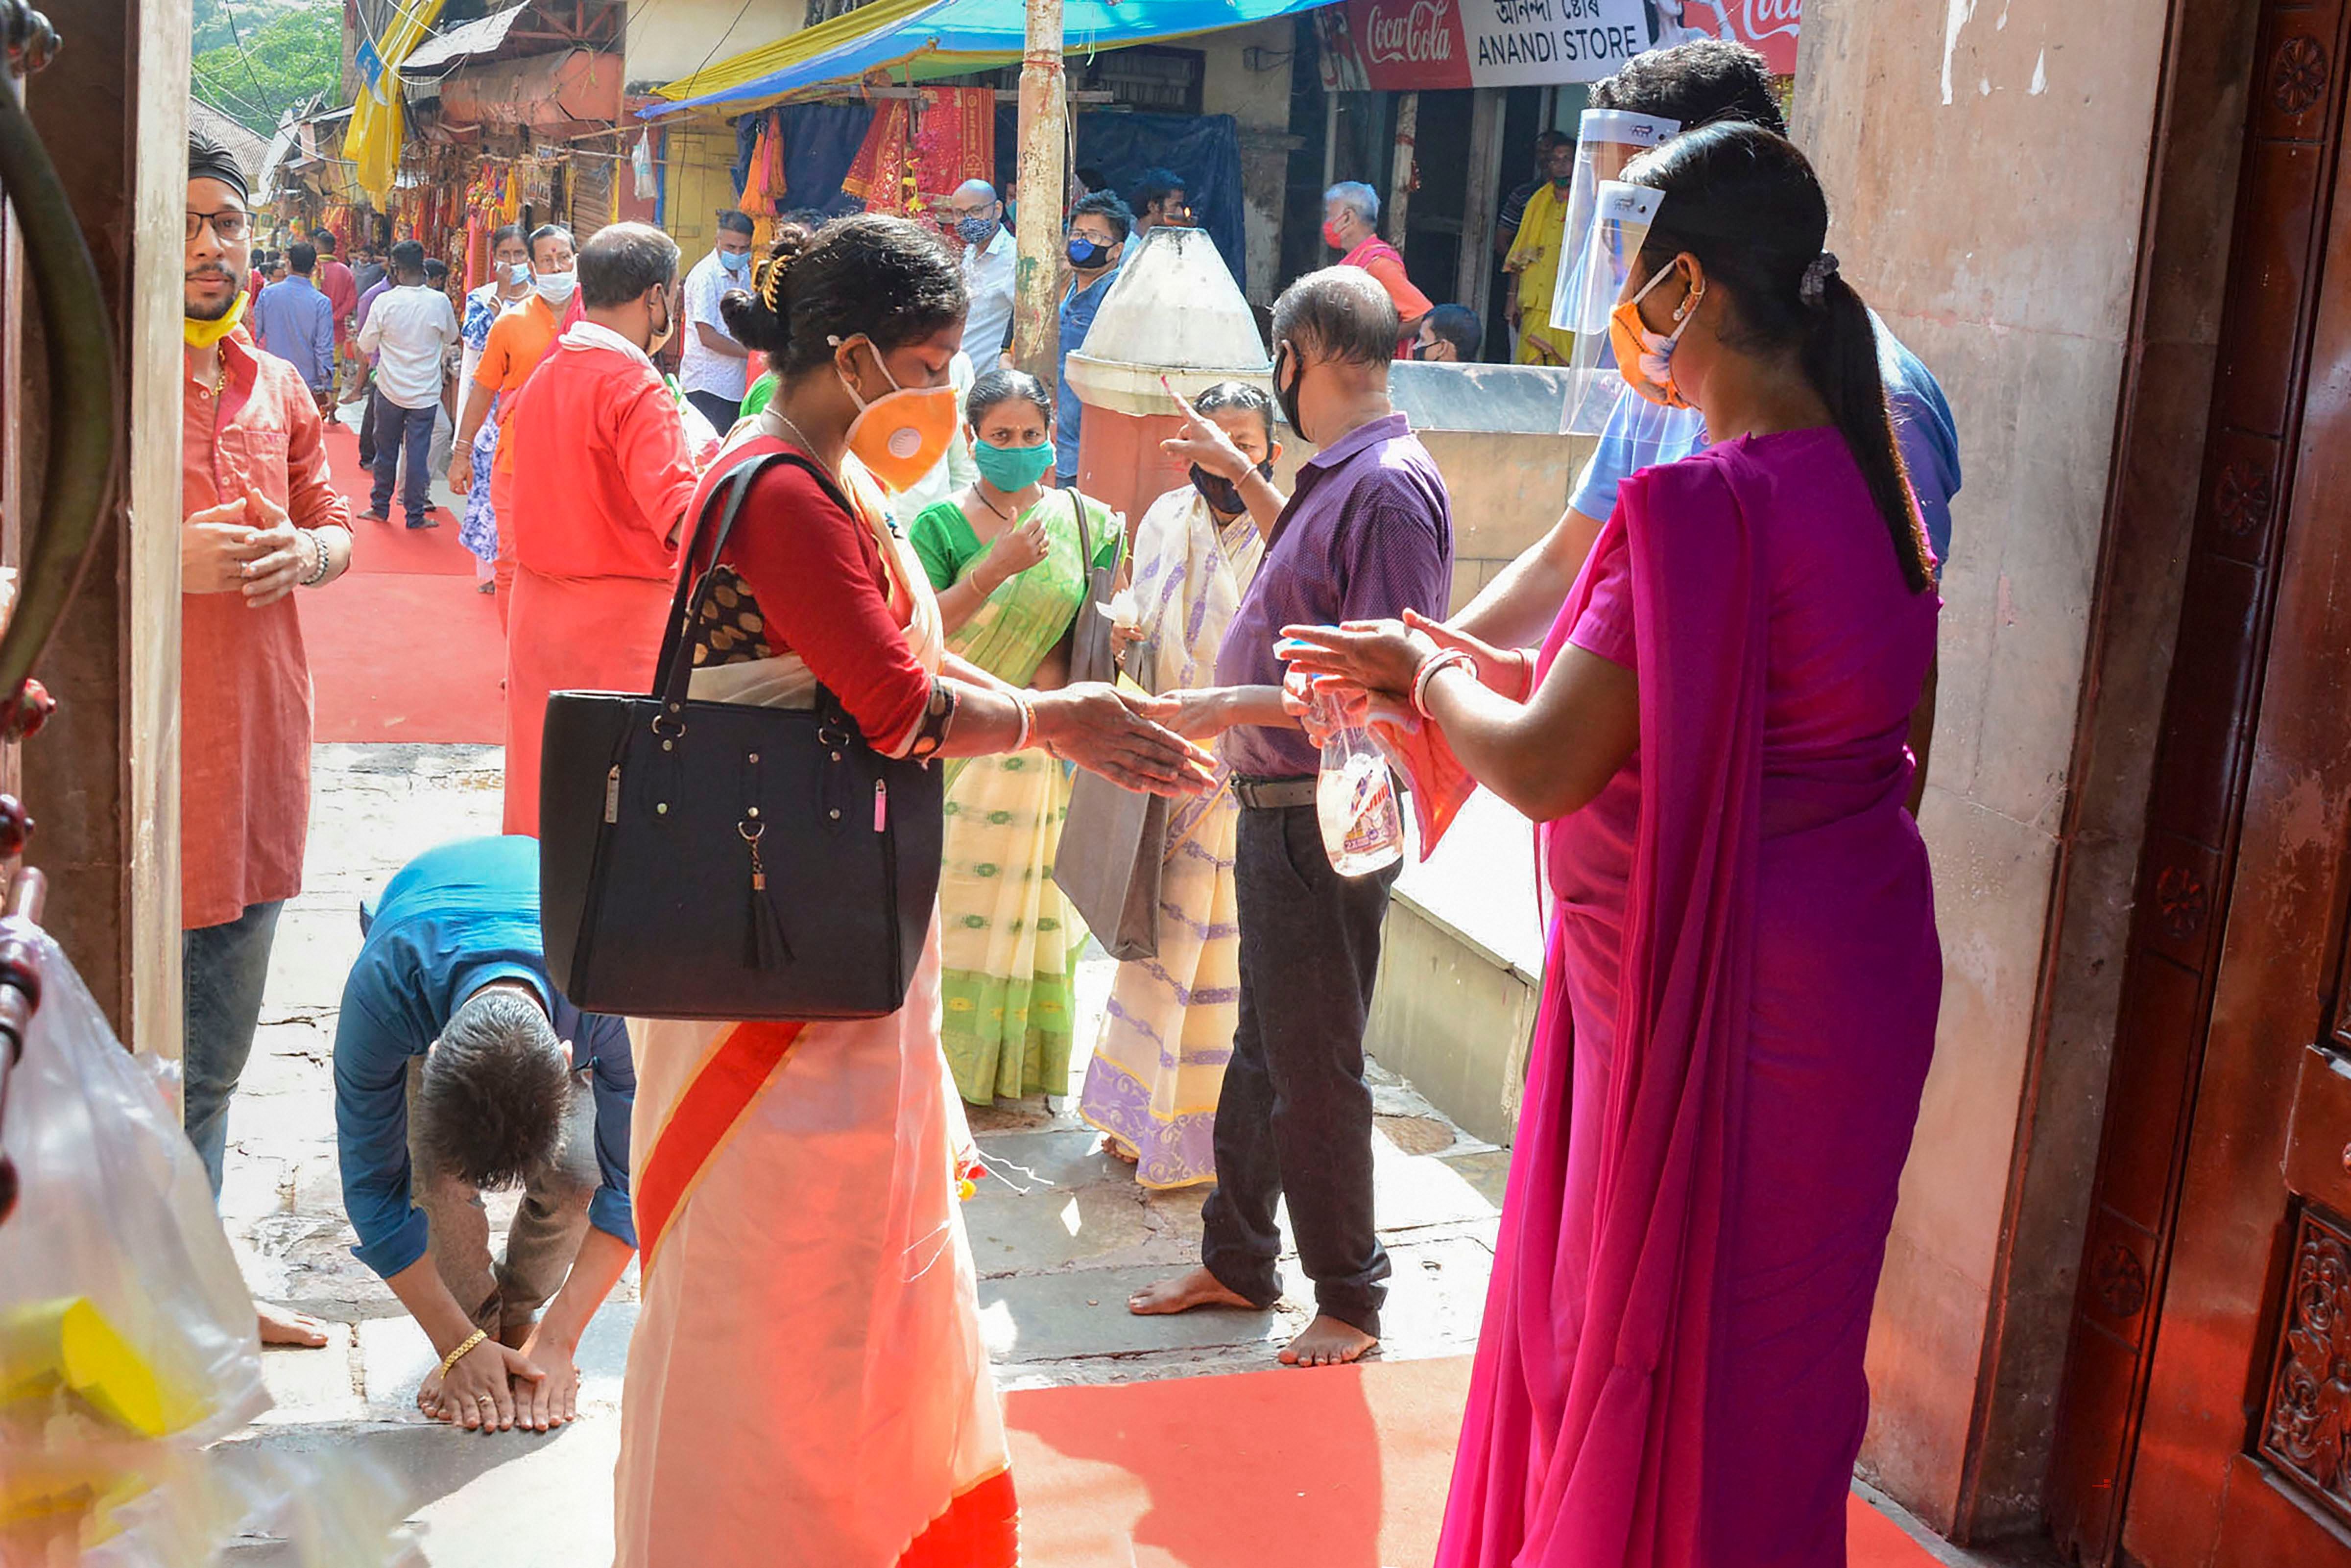 Devotees sanitise their hands inside the premises of Kamakhya Temple, as it re-opens for public after a gap of nearly six months due to coronavirus lockdown. Credits: PTI Photo